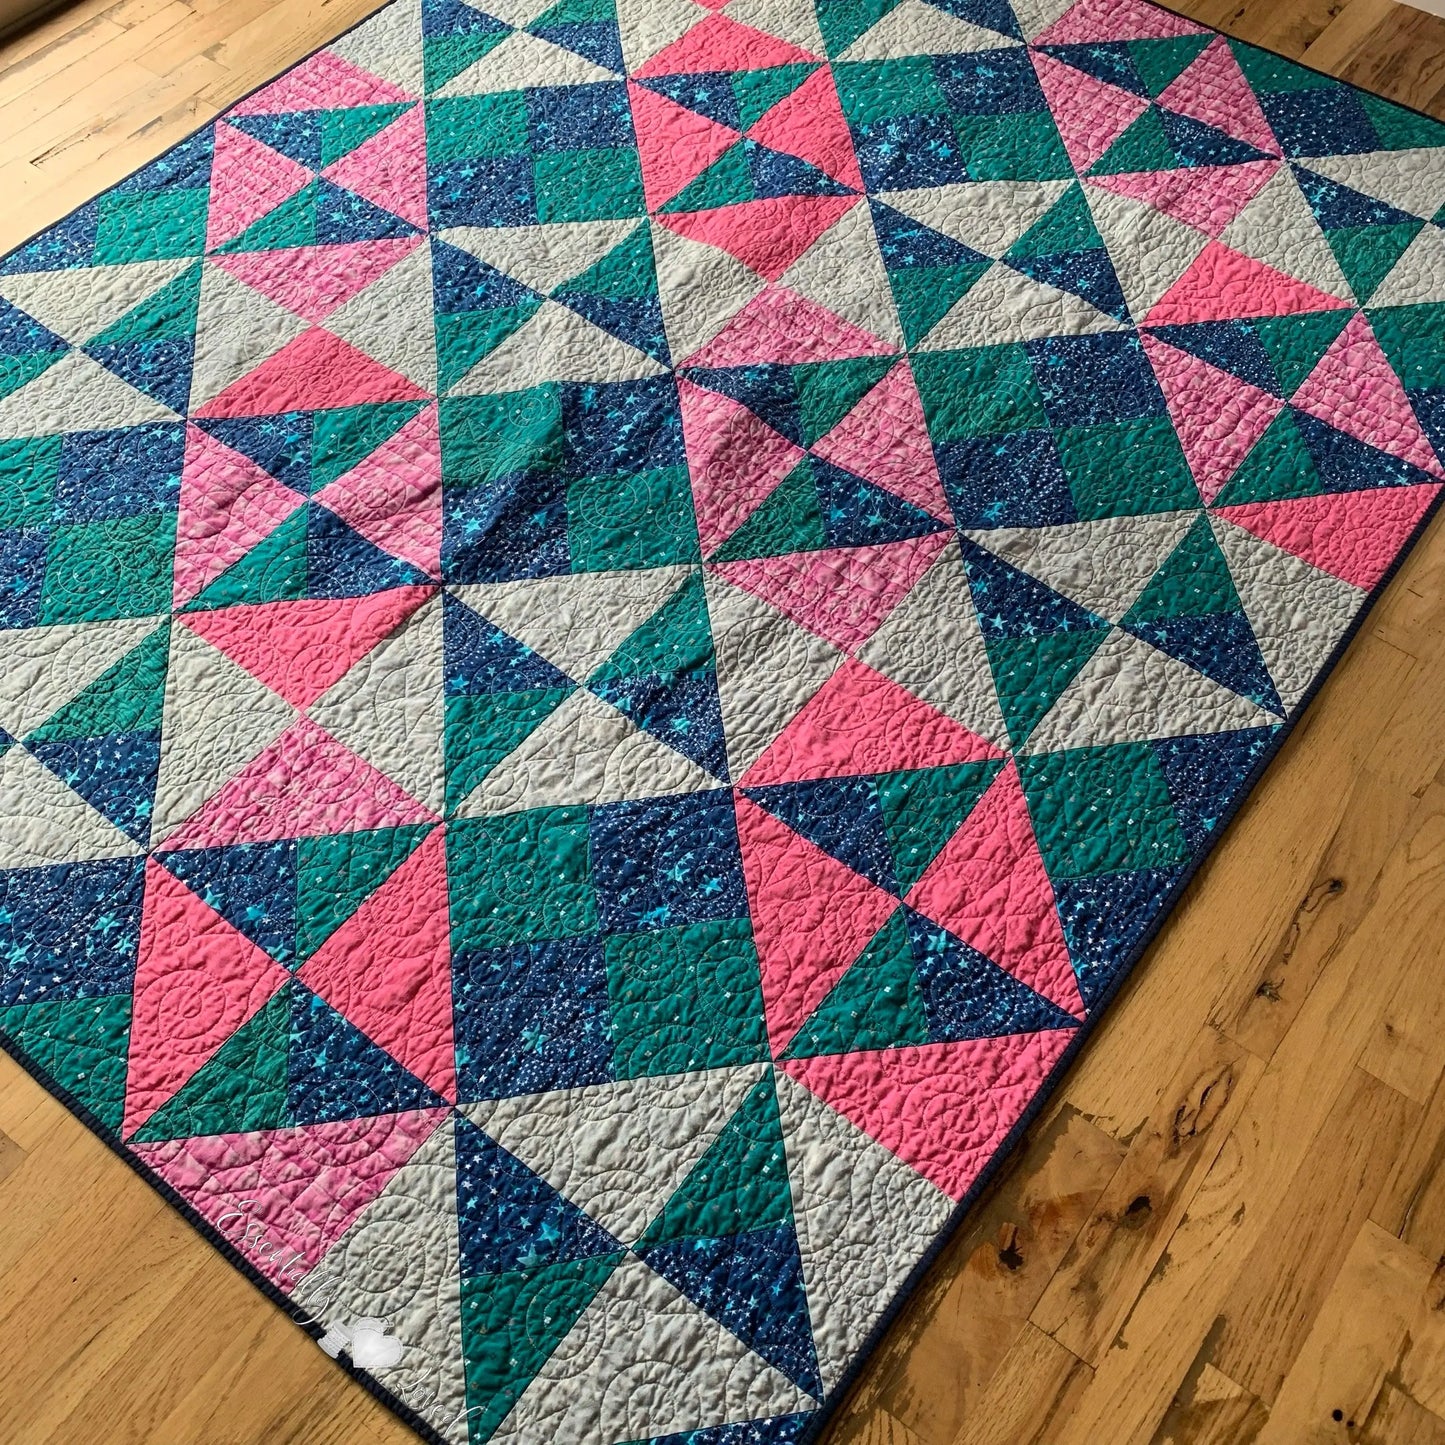 Tumbled Triangles Quilt - Essentially Loved Quilts